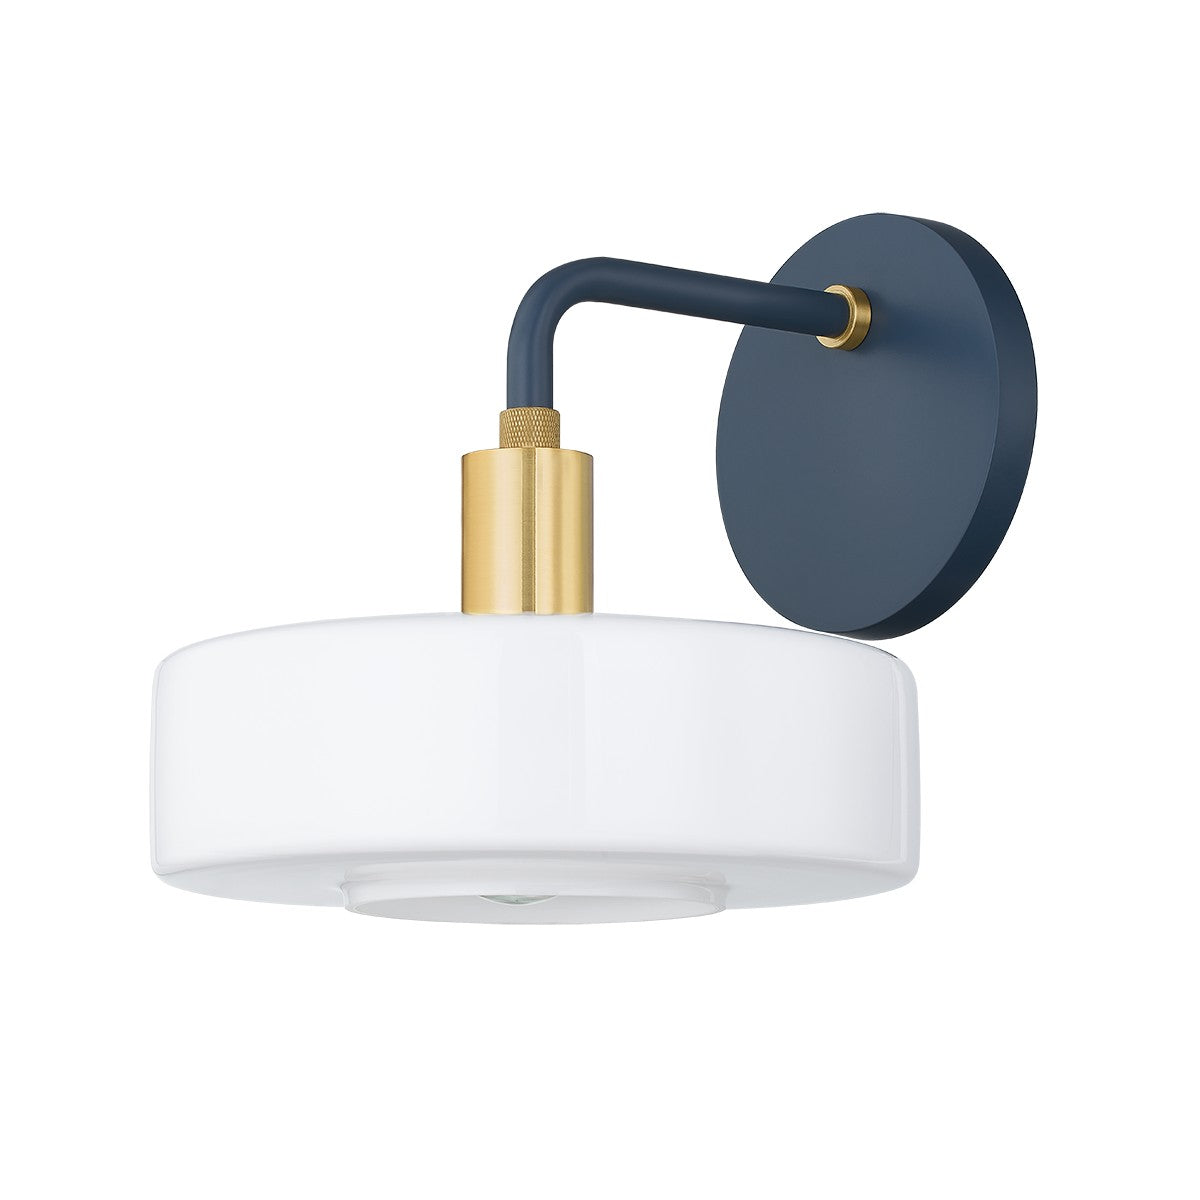 Mitzi - H886101-AGB/SBL - One Light Wall Sconce - Aston - Aged Brass/Slate Blue